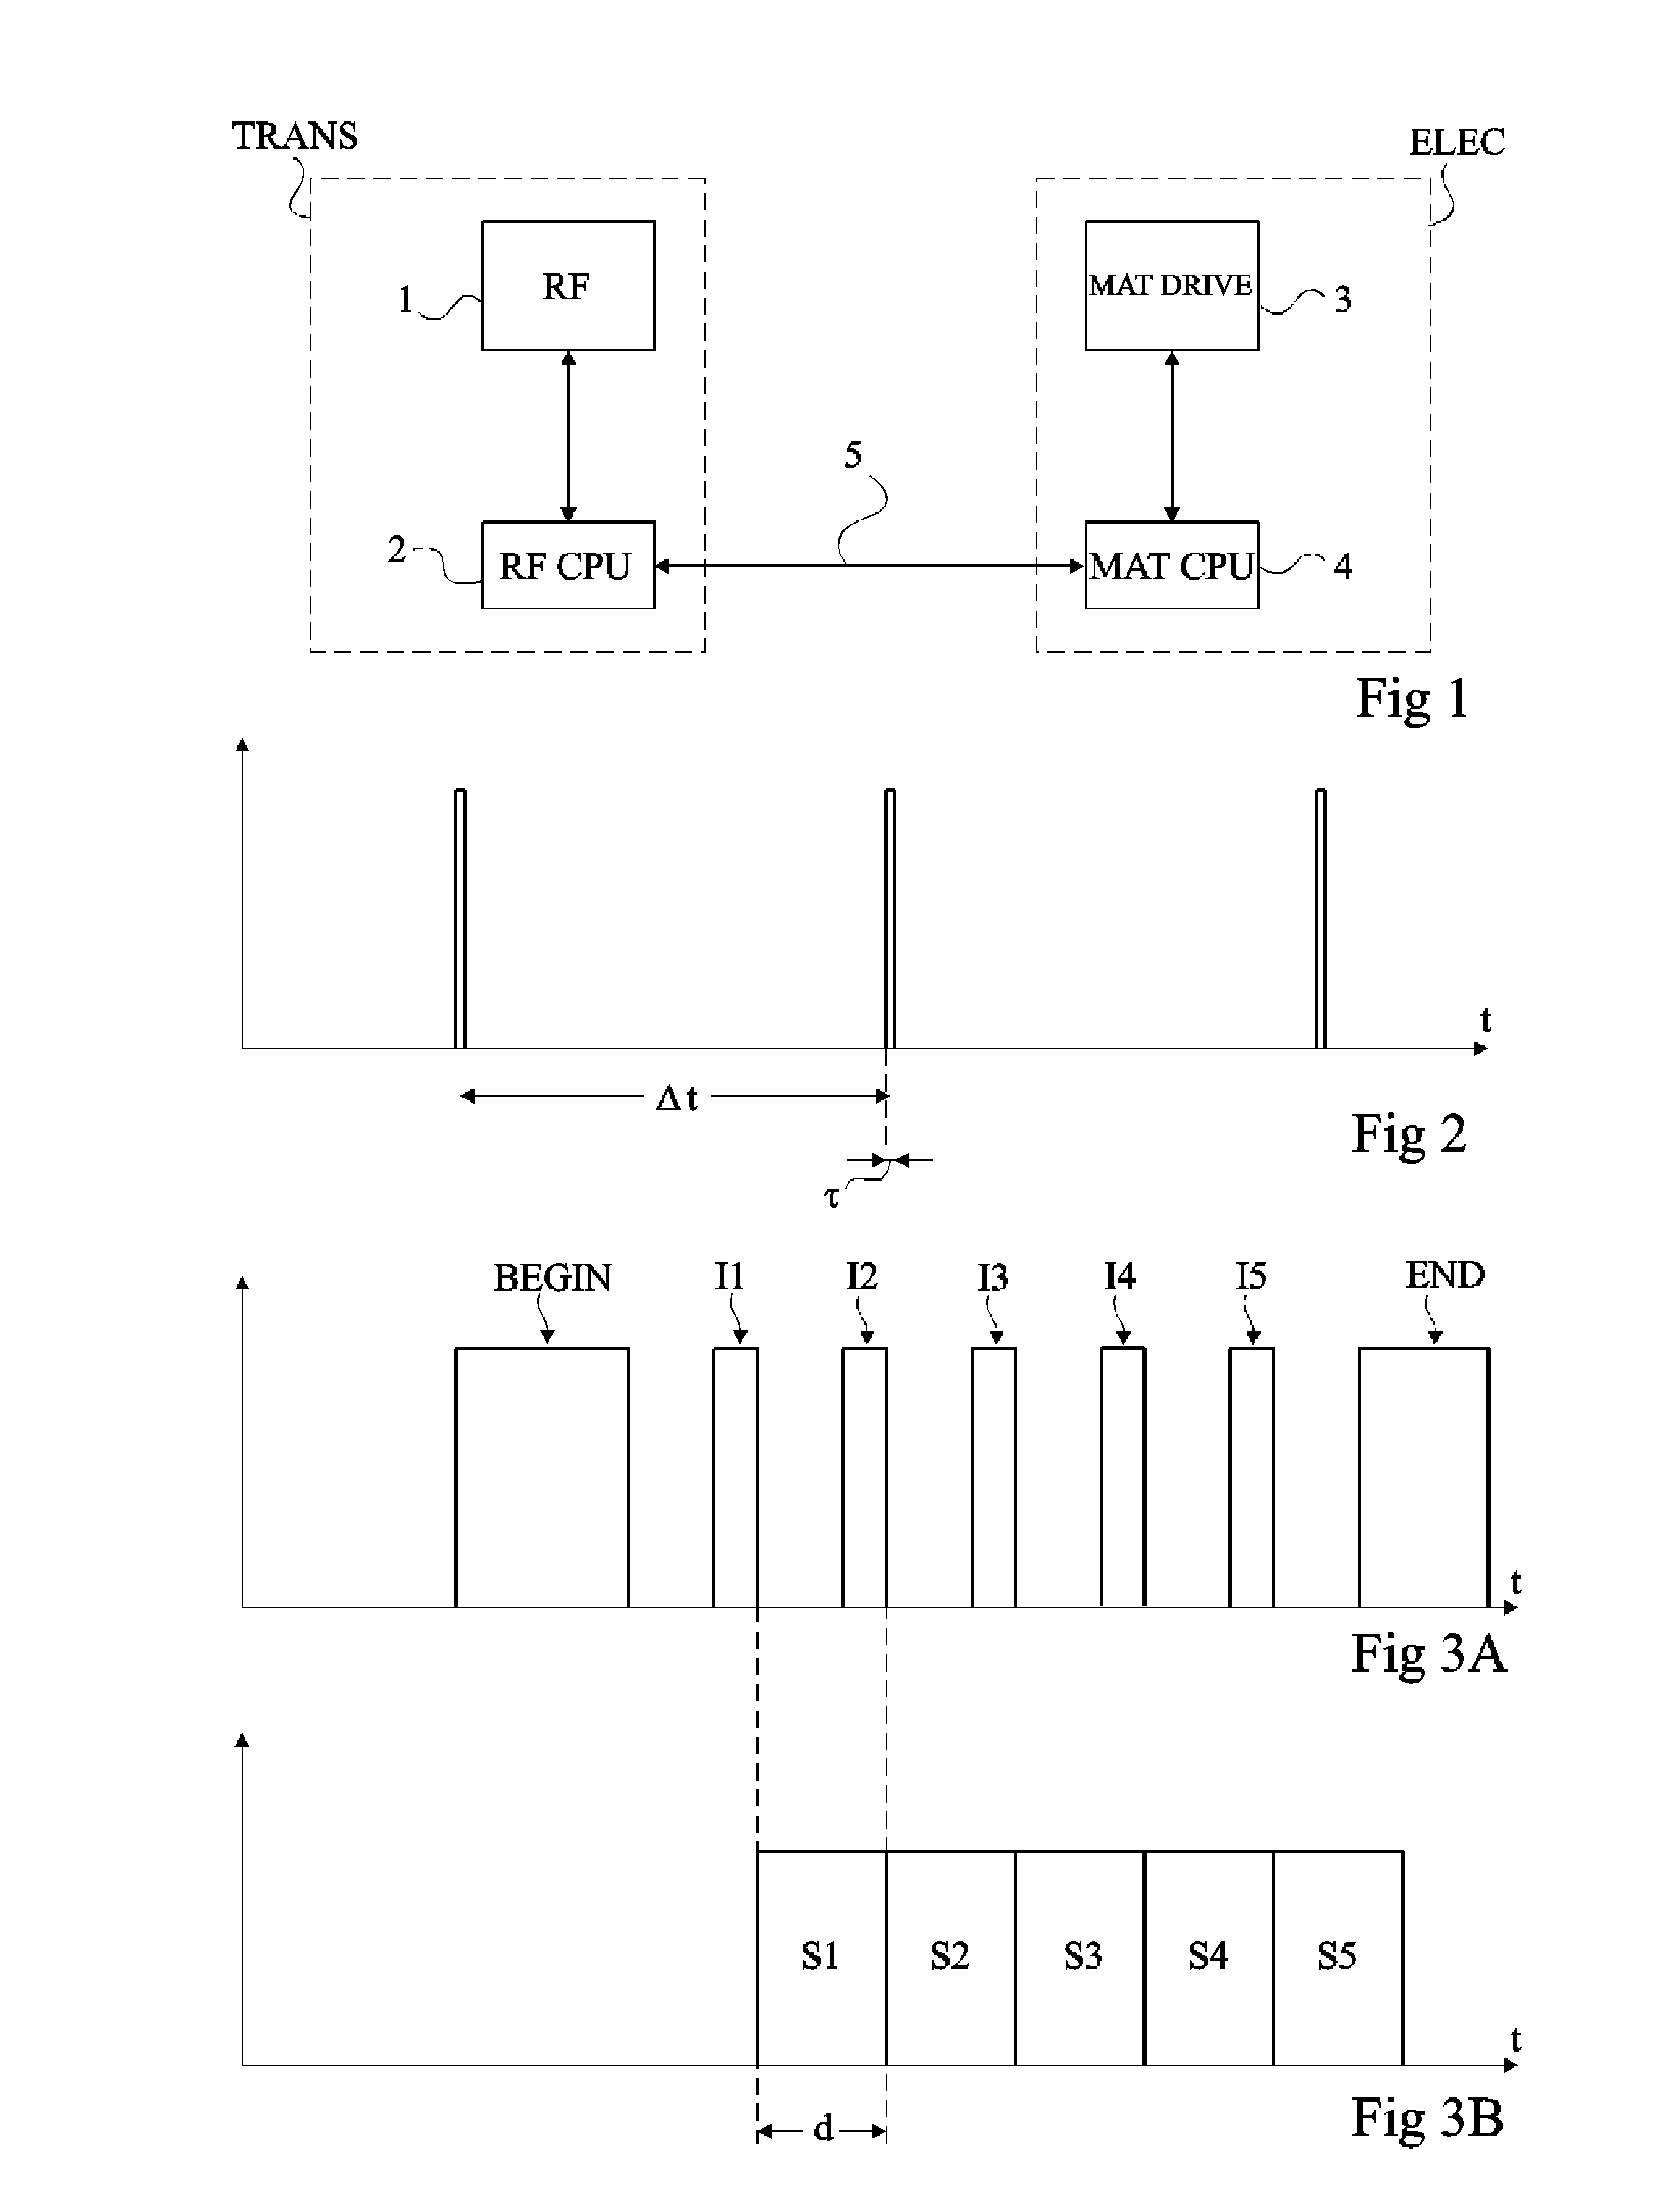 Oral Prosthesis System Including an Electrostimulation Device Associated with a Wireless Transmission-Reception Device